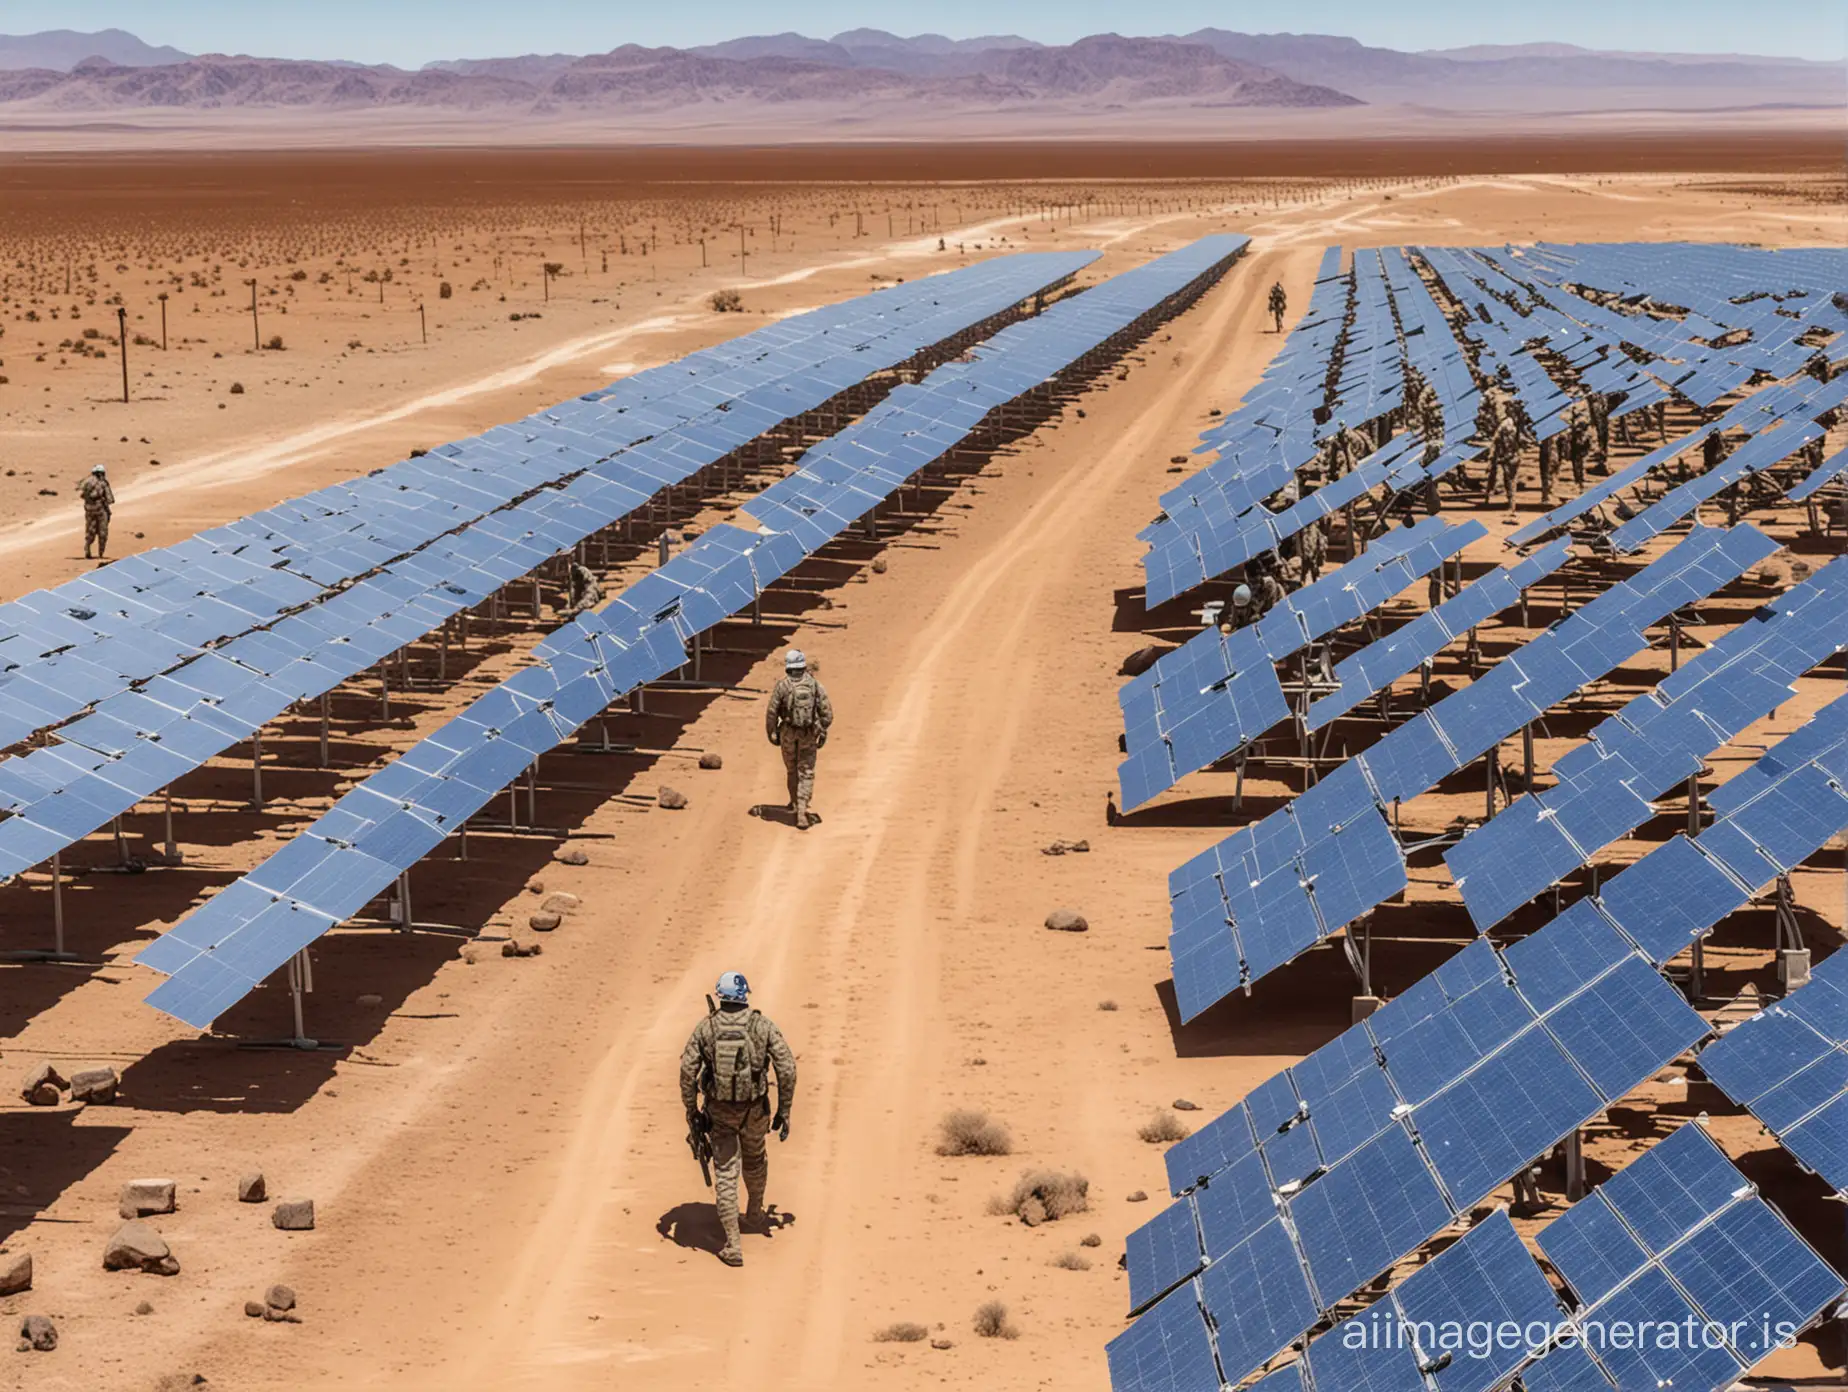 Vast-Solar-Energy-Farm-with-Guarded-Security-in-Desert-Landscape